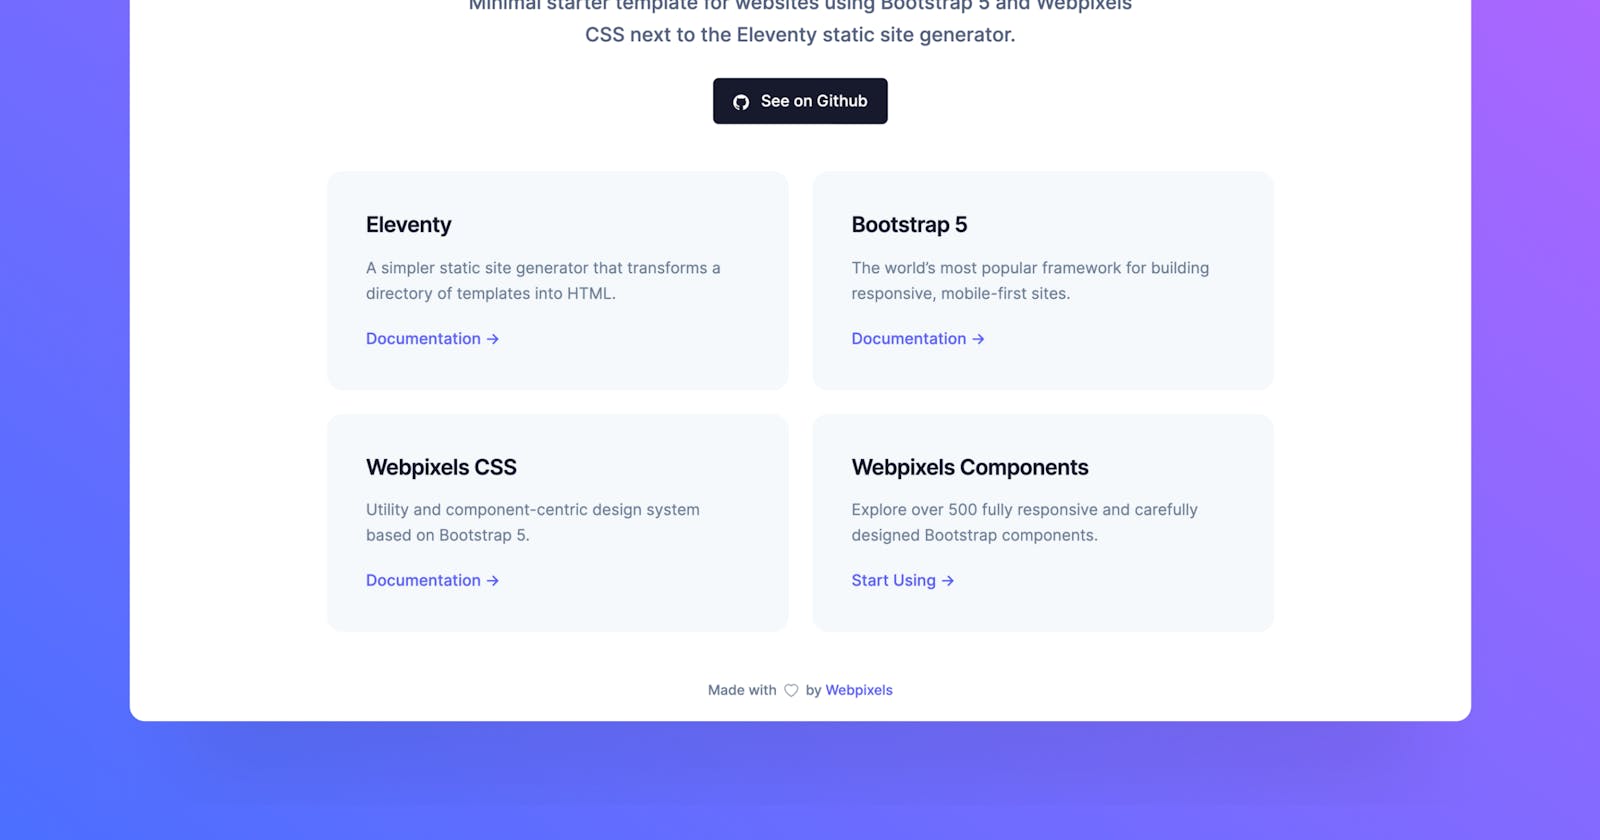 How to get started with Bootstrap and Eleventy